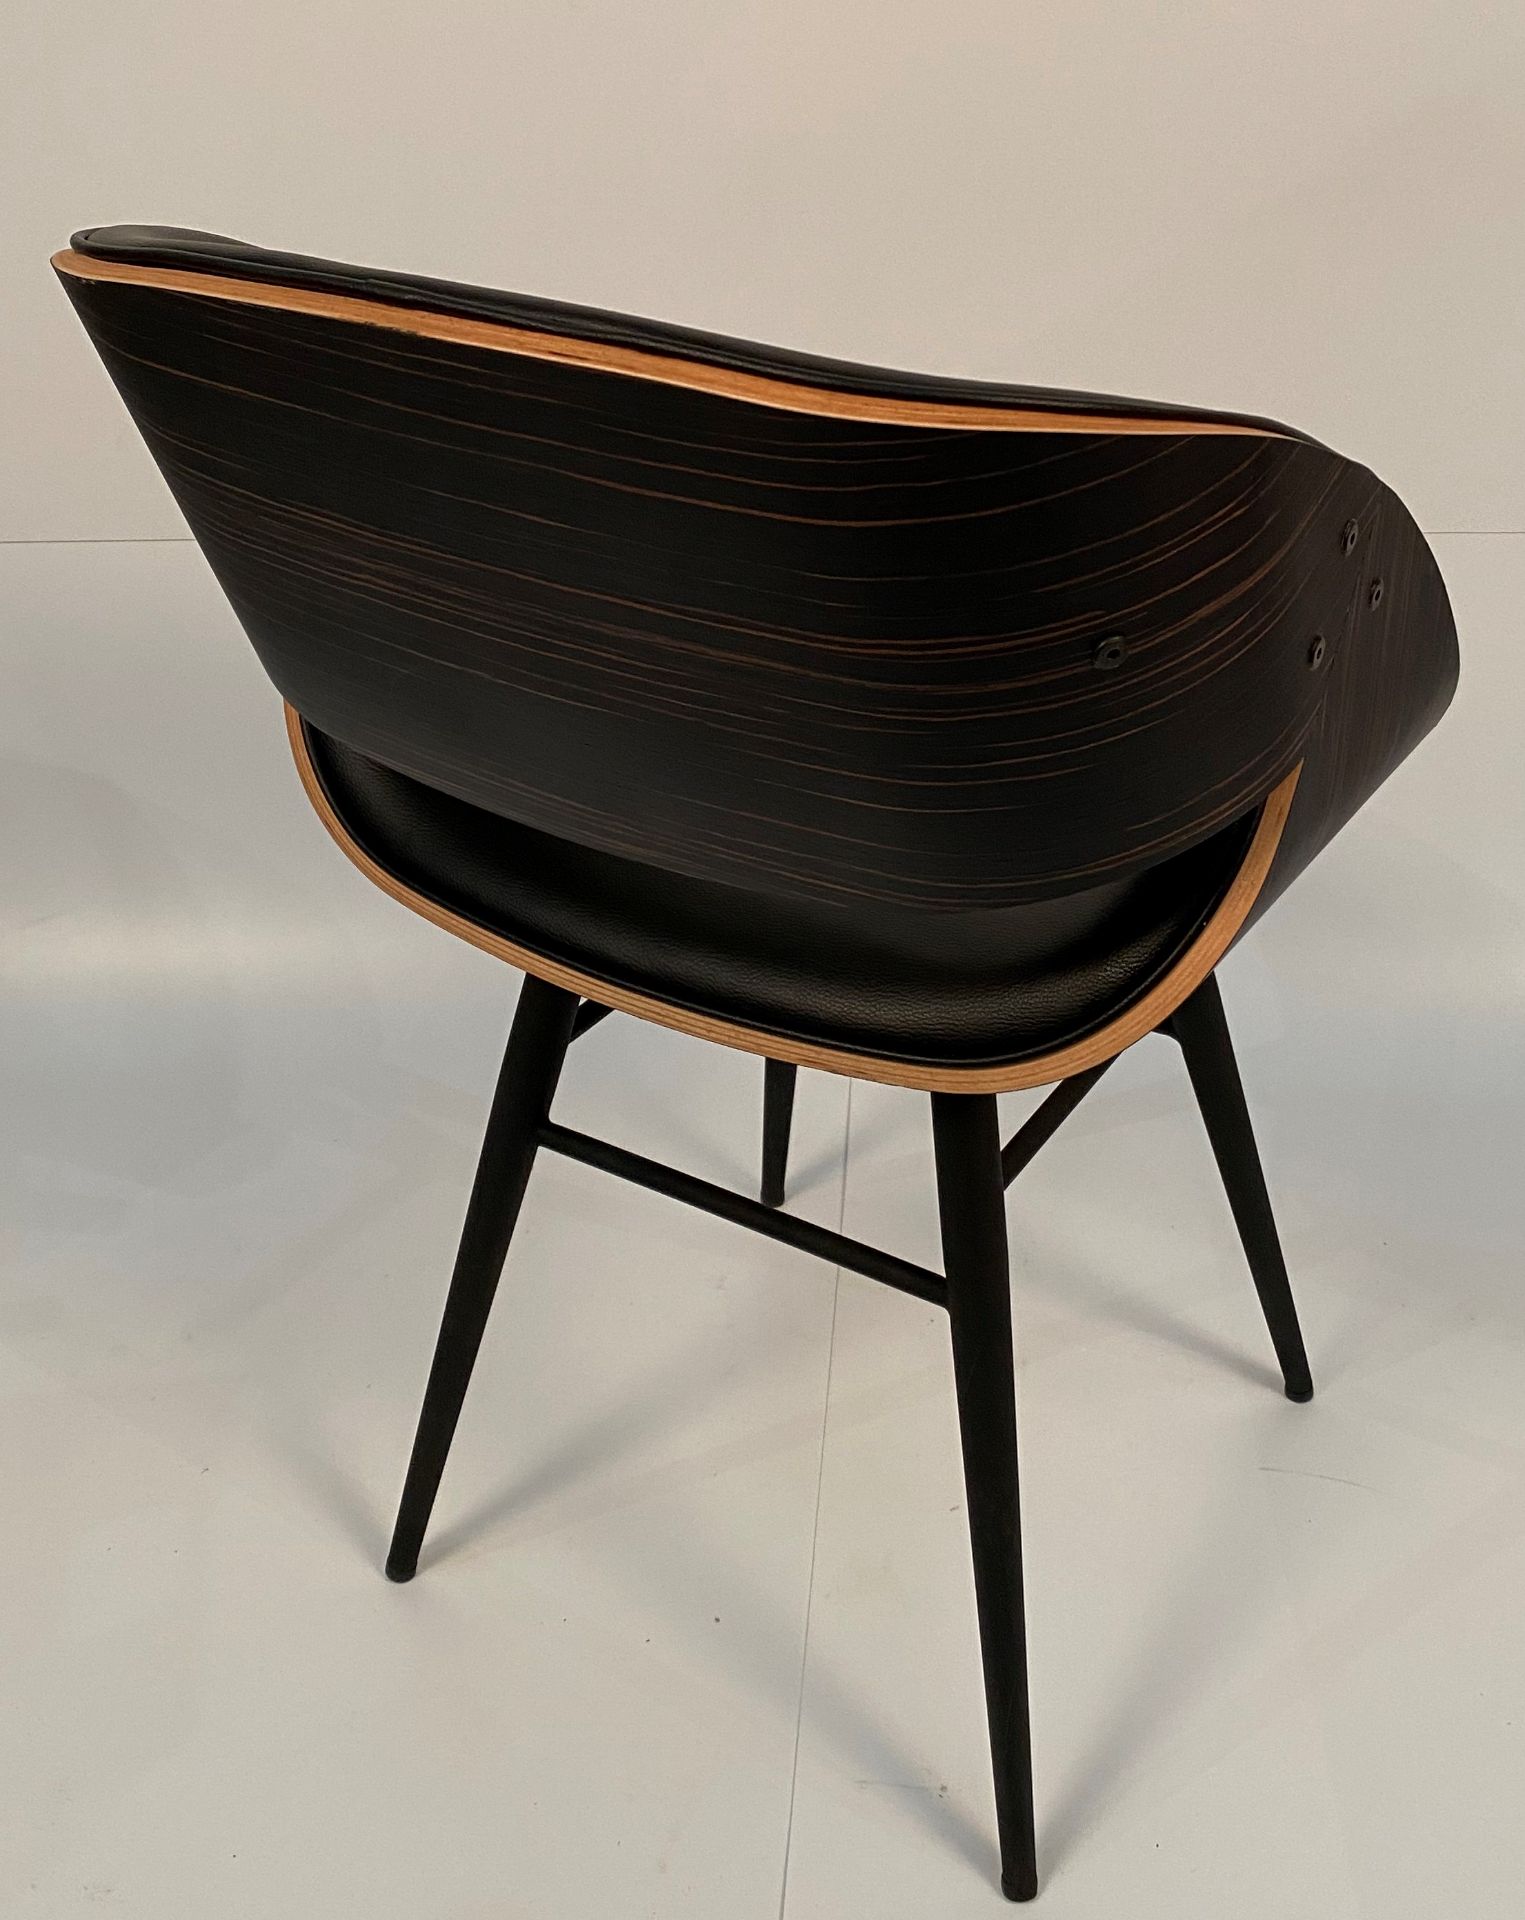 A Rico Ebony Black upholstered side chair - Image 3 of 4